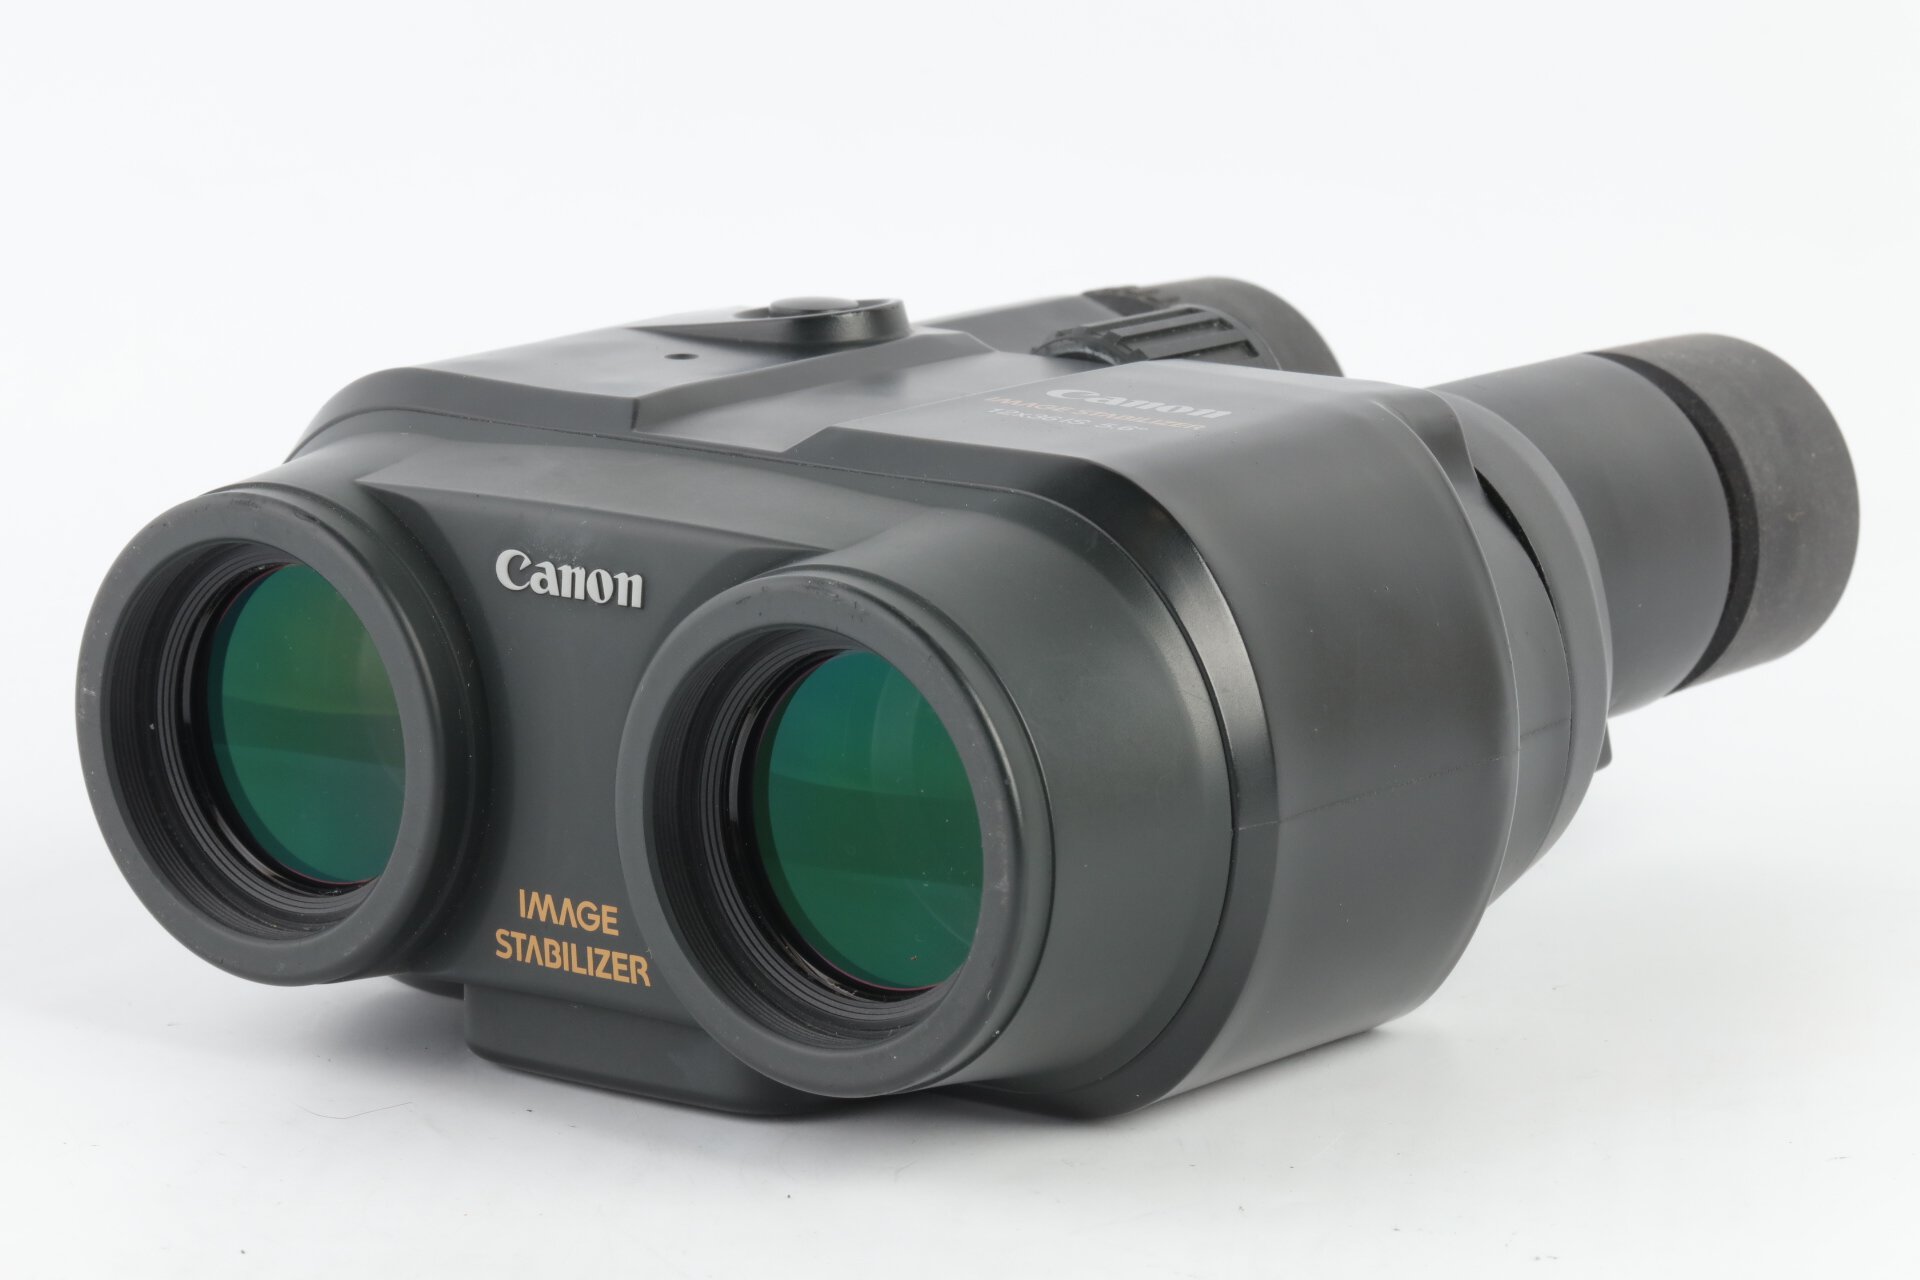 Canon 12x36 IS 5.6° Fernglas